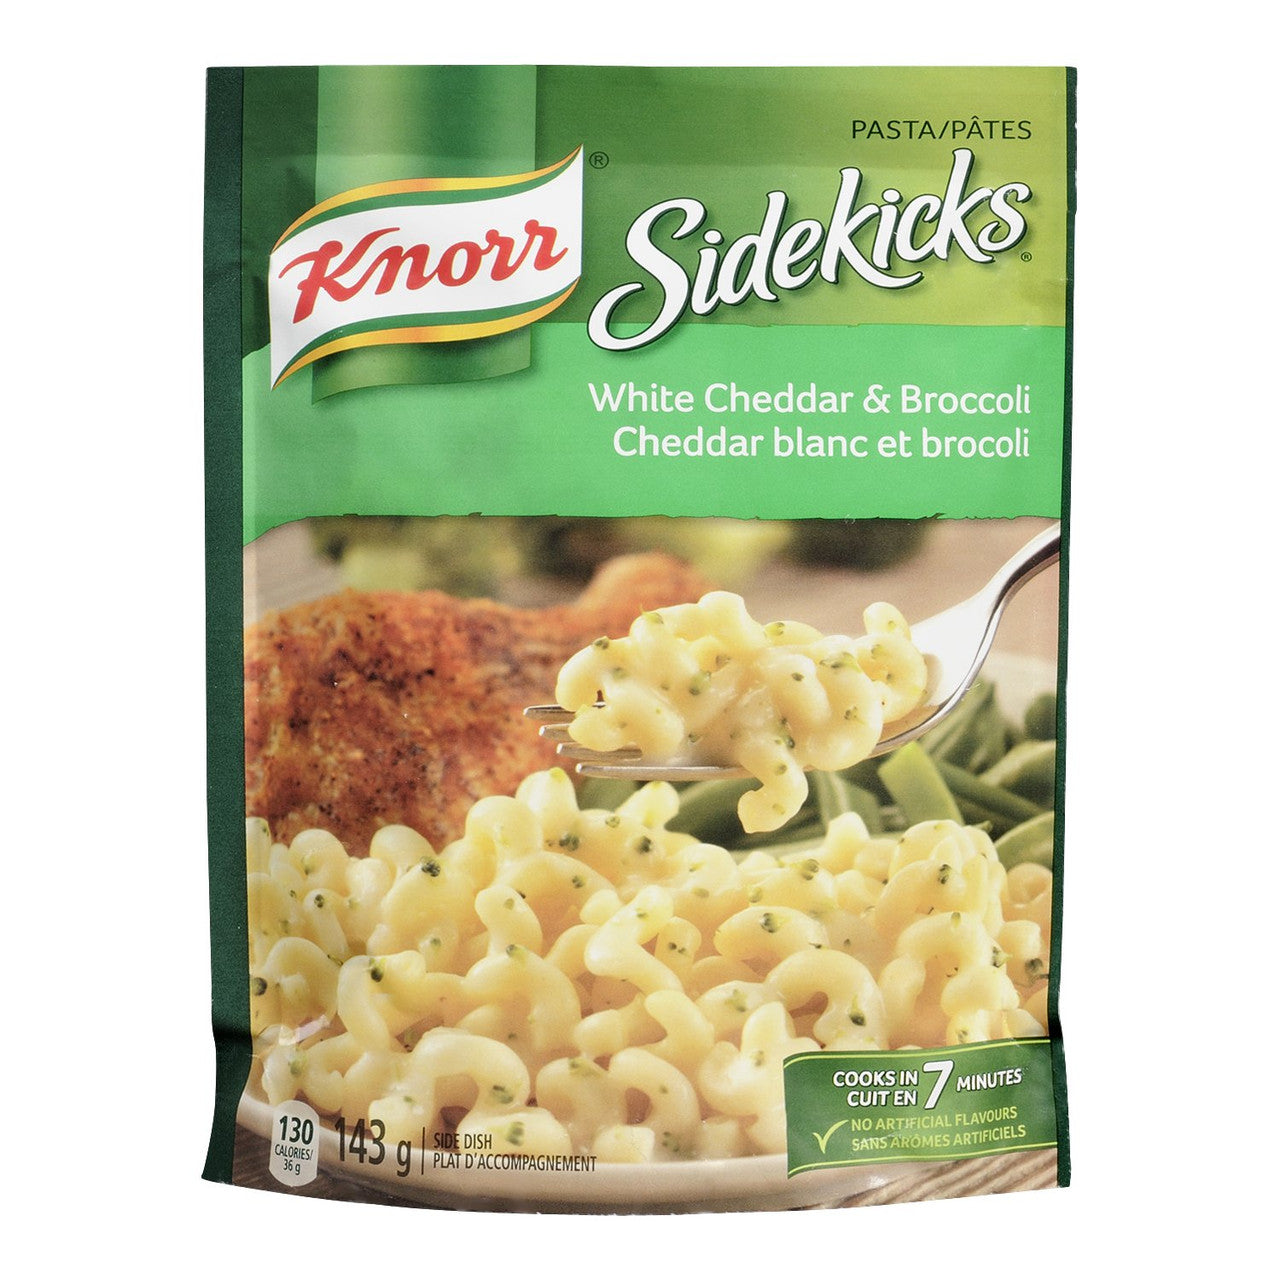 Knorr Sidekicks, White Cheddar & Broccoli, Pasta Side Dish, 143g/5oz., 8ct {Imported from Canada}